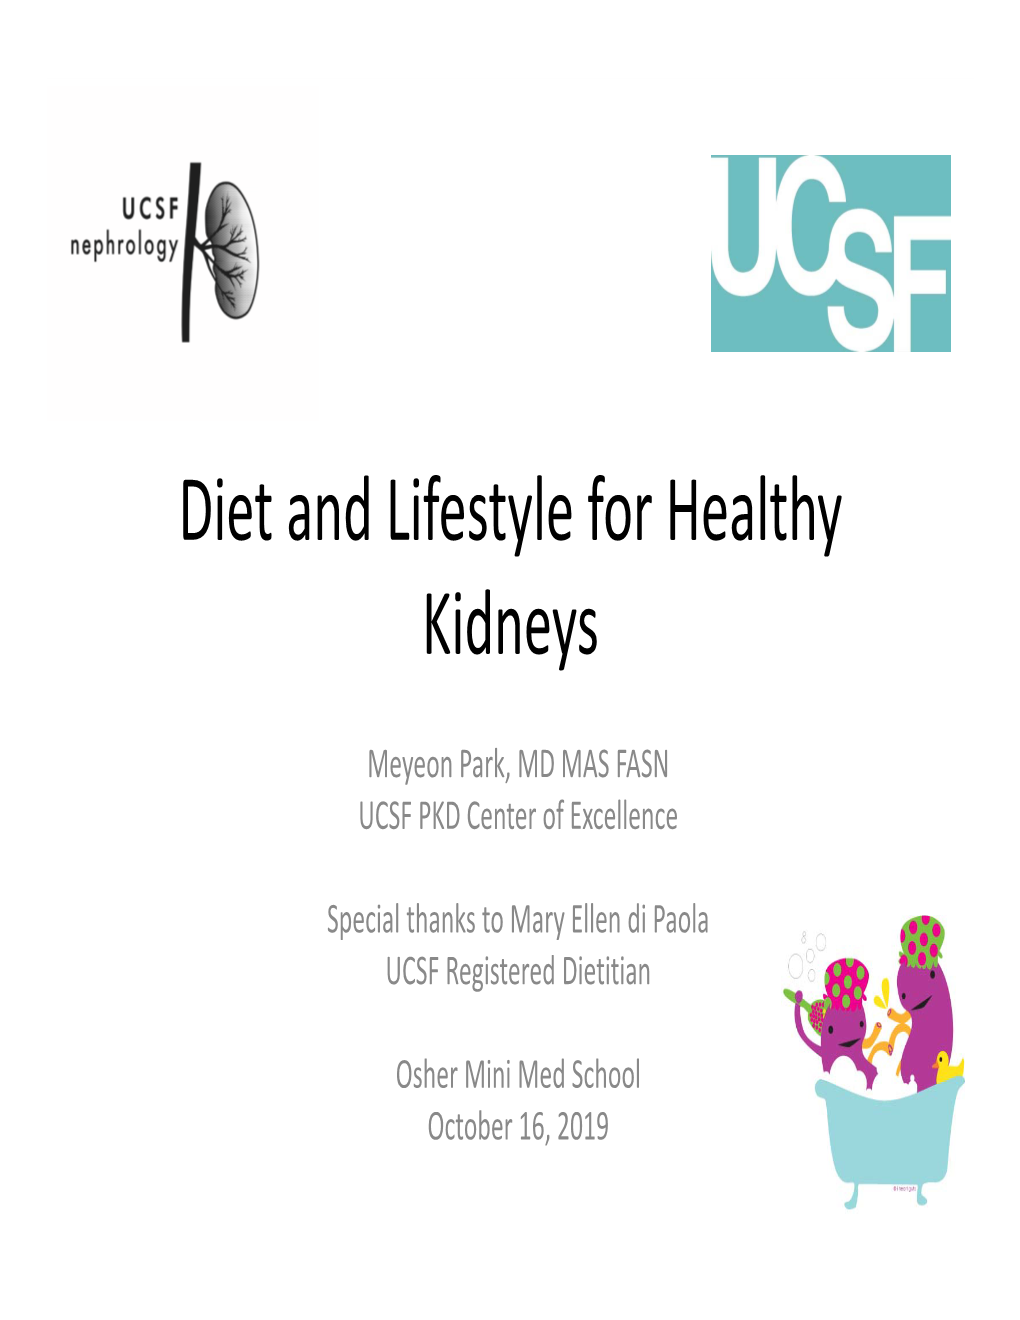 Diet and Lifestyle for Healthy Kidneys